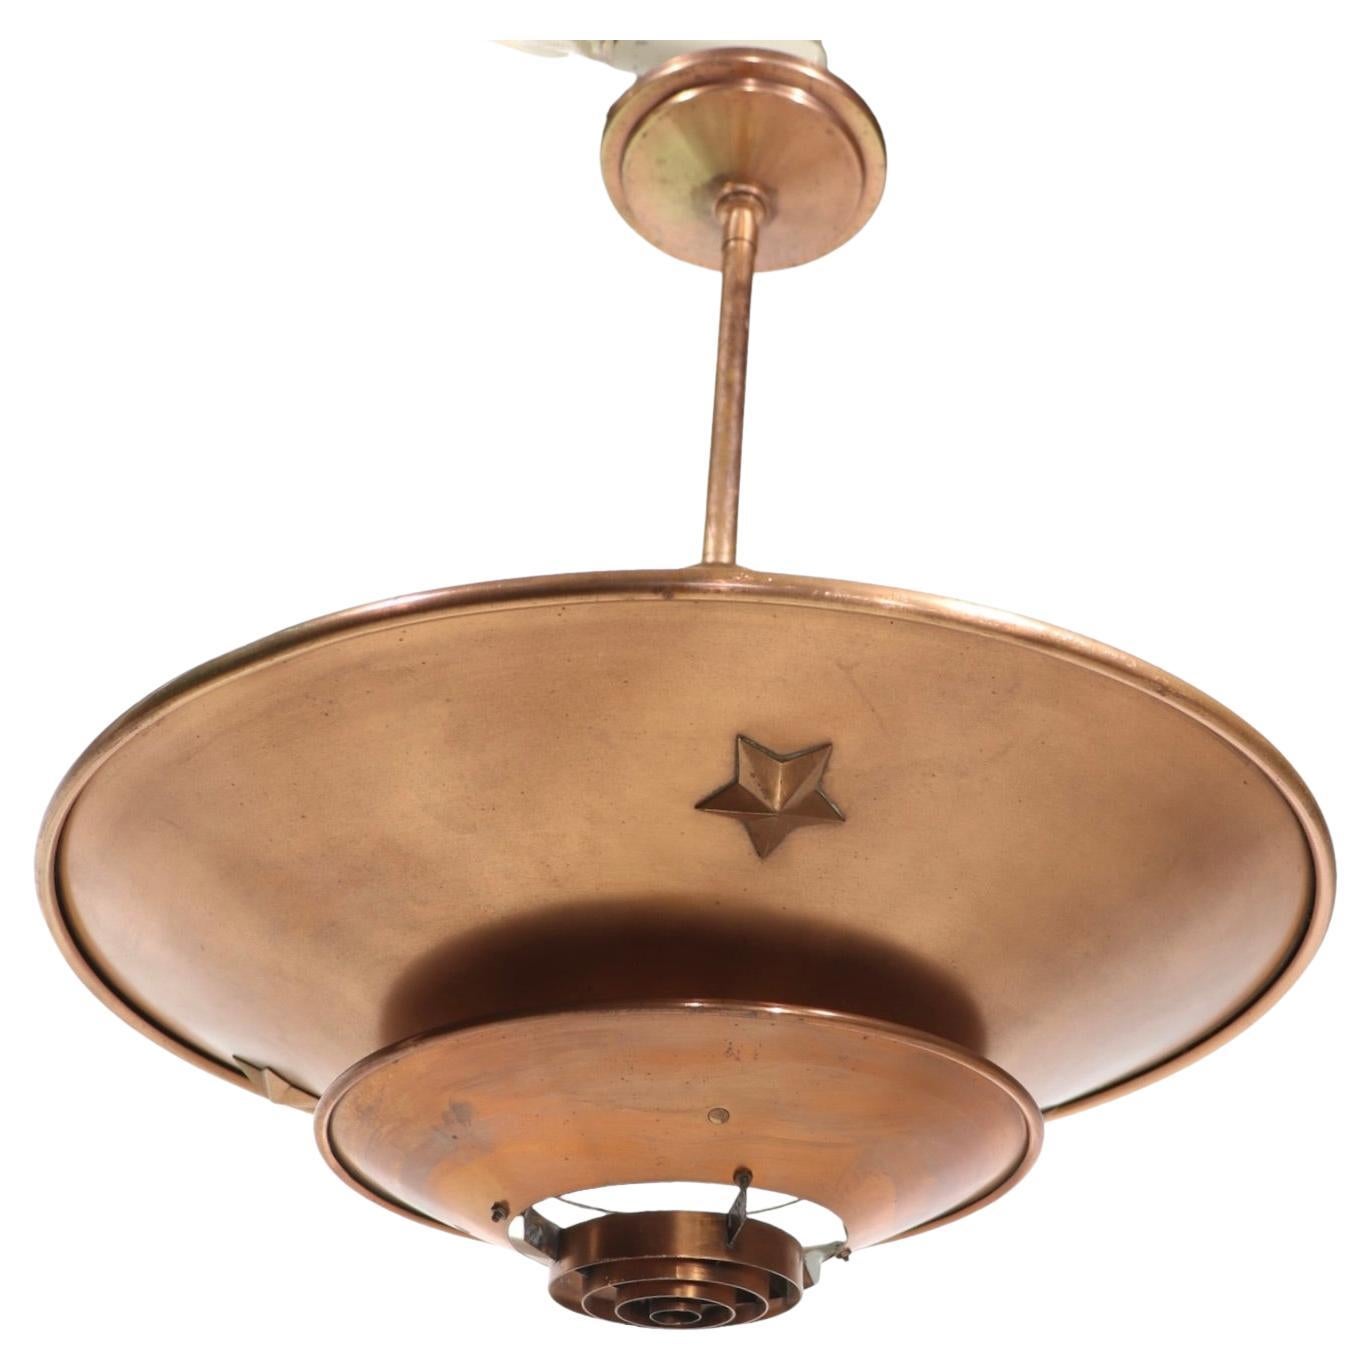 Chic, architectural and sophisticated saucer form chandelier, Art Deco, Machine Age style circa  1930’s. 
The fixture features three graduated disk form rings, the smallest ring at the center bottom is constructed of concentric rings, to allow more